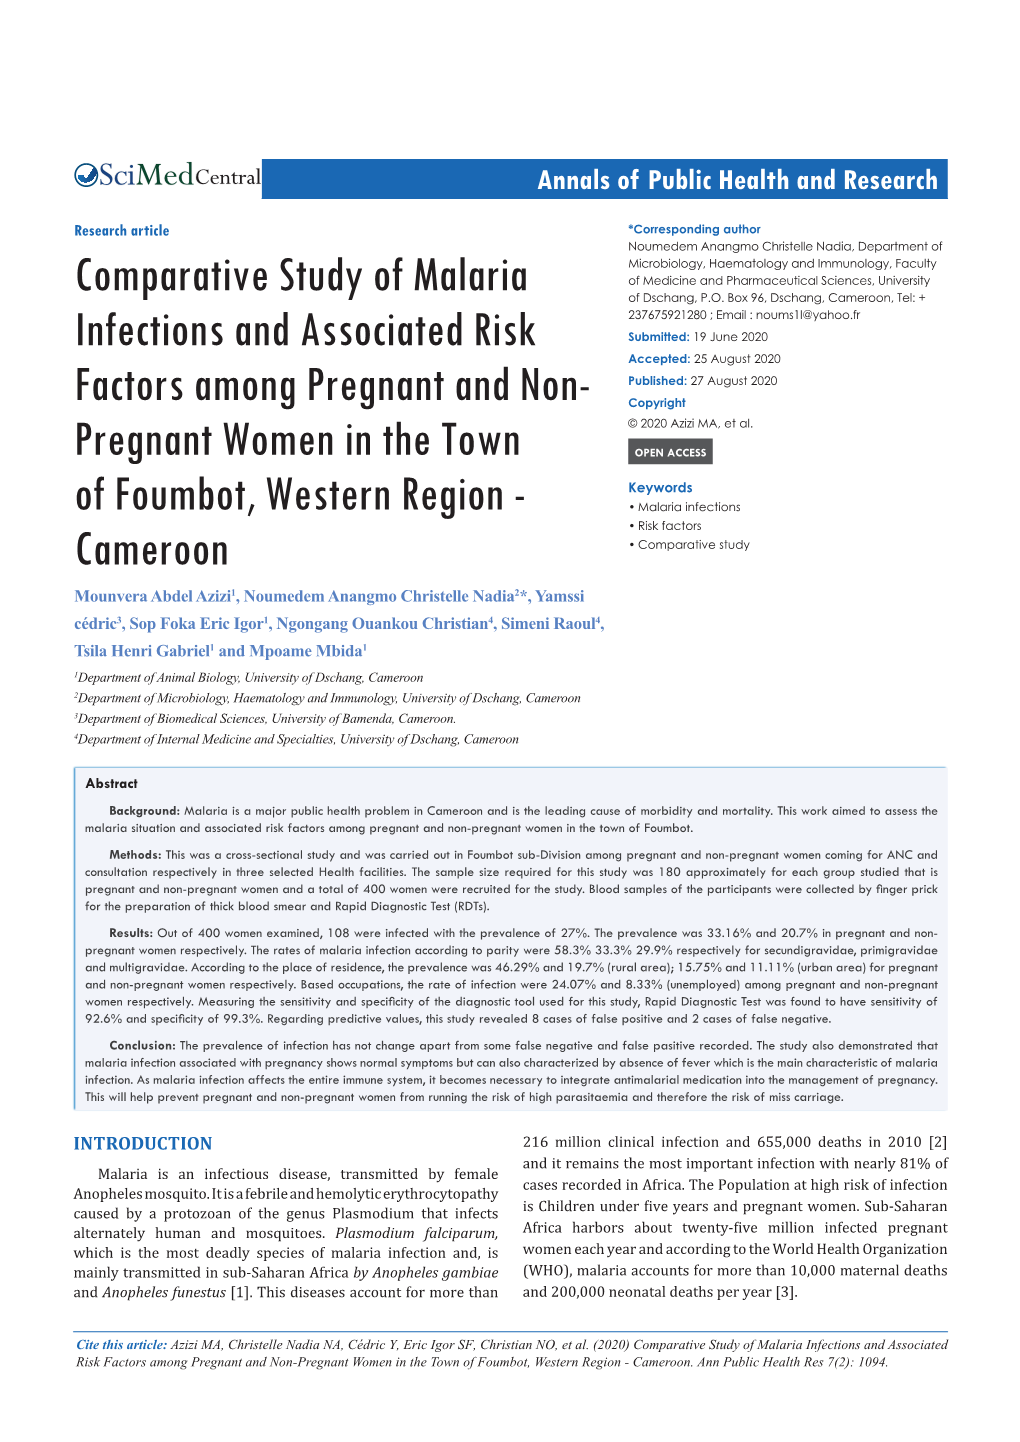 Comparative Study of Malaria Infections and Associated Risk Factors Among Pregnant and Non-Pregnant Women in the Town of Foumbot, Western Region - Cameroon